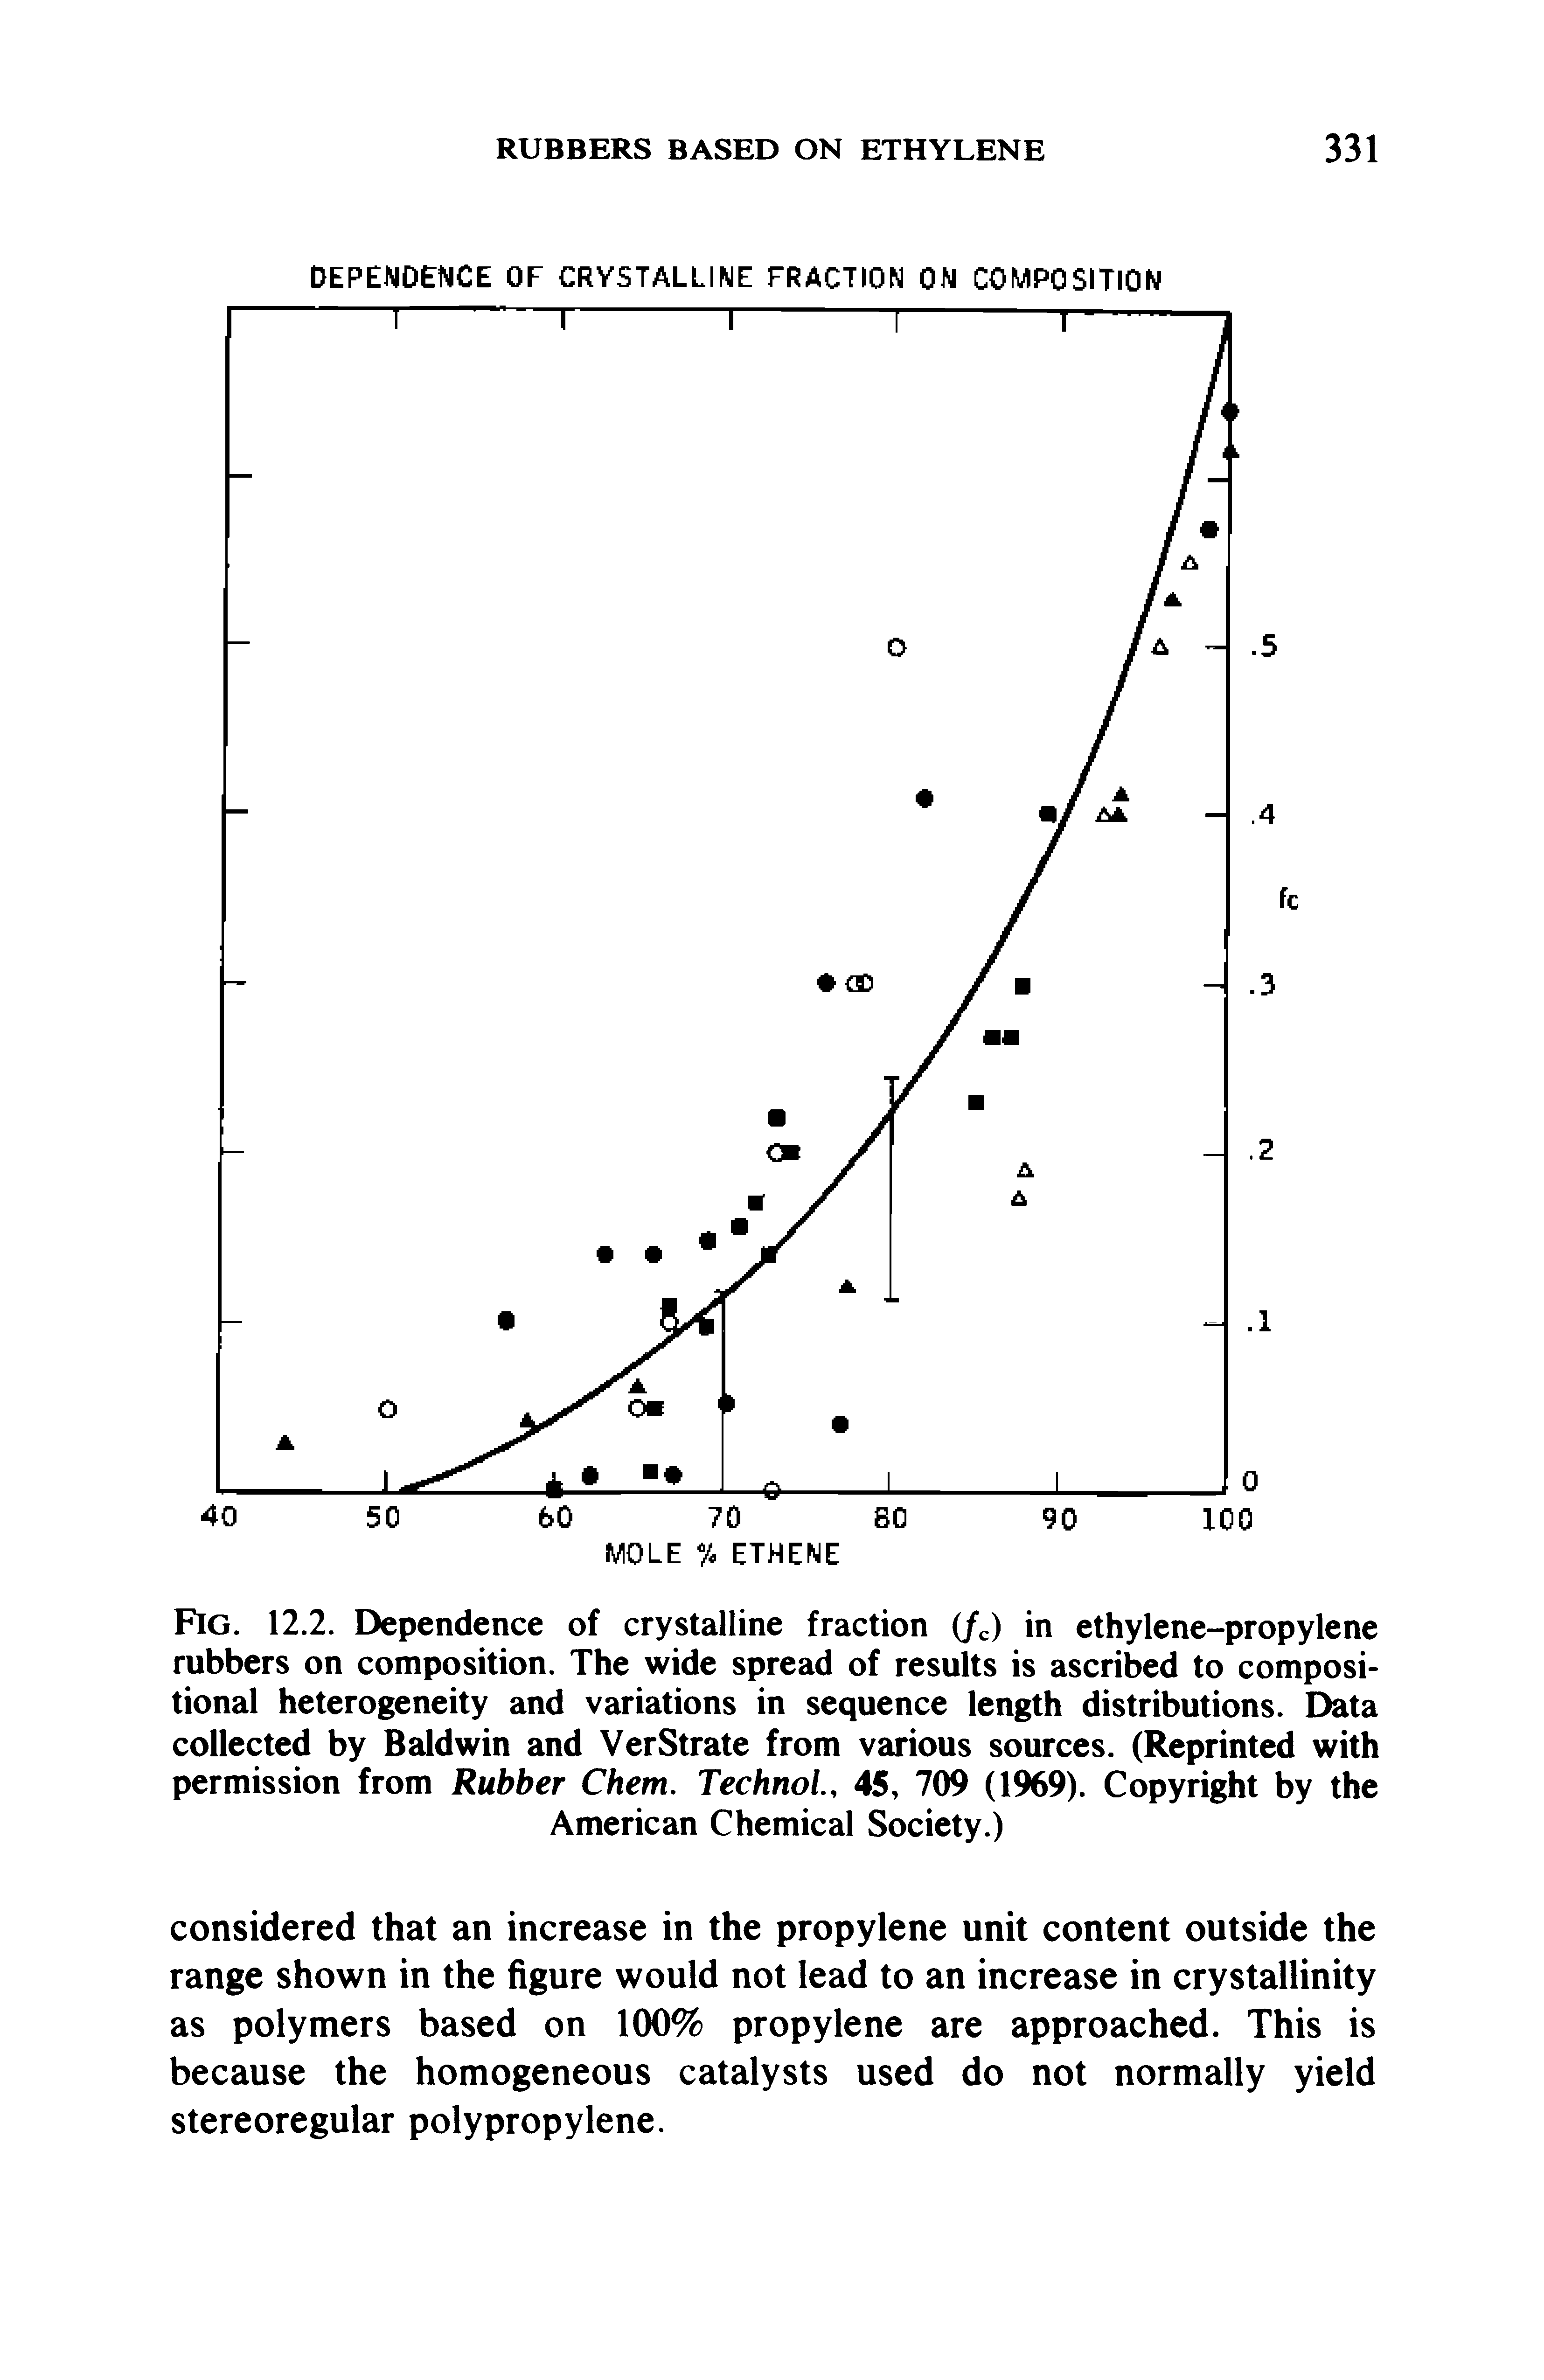 Fig. 12.2. Dependence of crystalline fraction (/c) in ethylene-propylene rubbers on composition. The wide spread of results is ascribed to compositional heterogeneity and variations in sequence length distributions. Data collected by Baldwin and VerStrate from various sources. (Reprinted with permission from Rubber Chem. TechnoL, 45, 709 (1969). Copyright by the American Chemical Society.)...